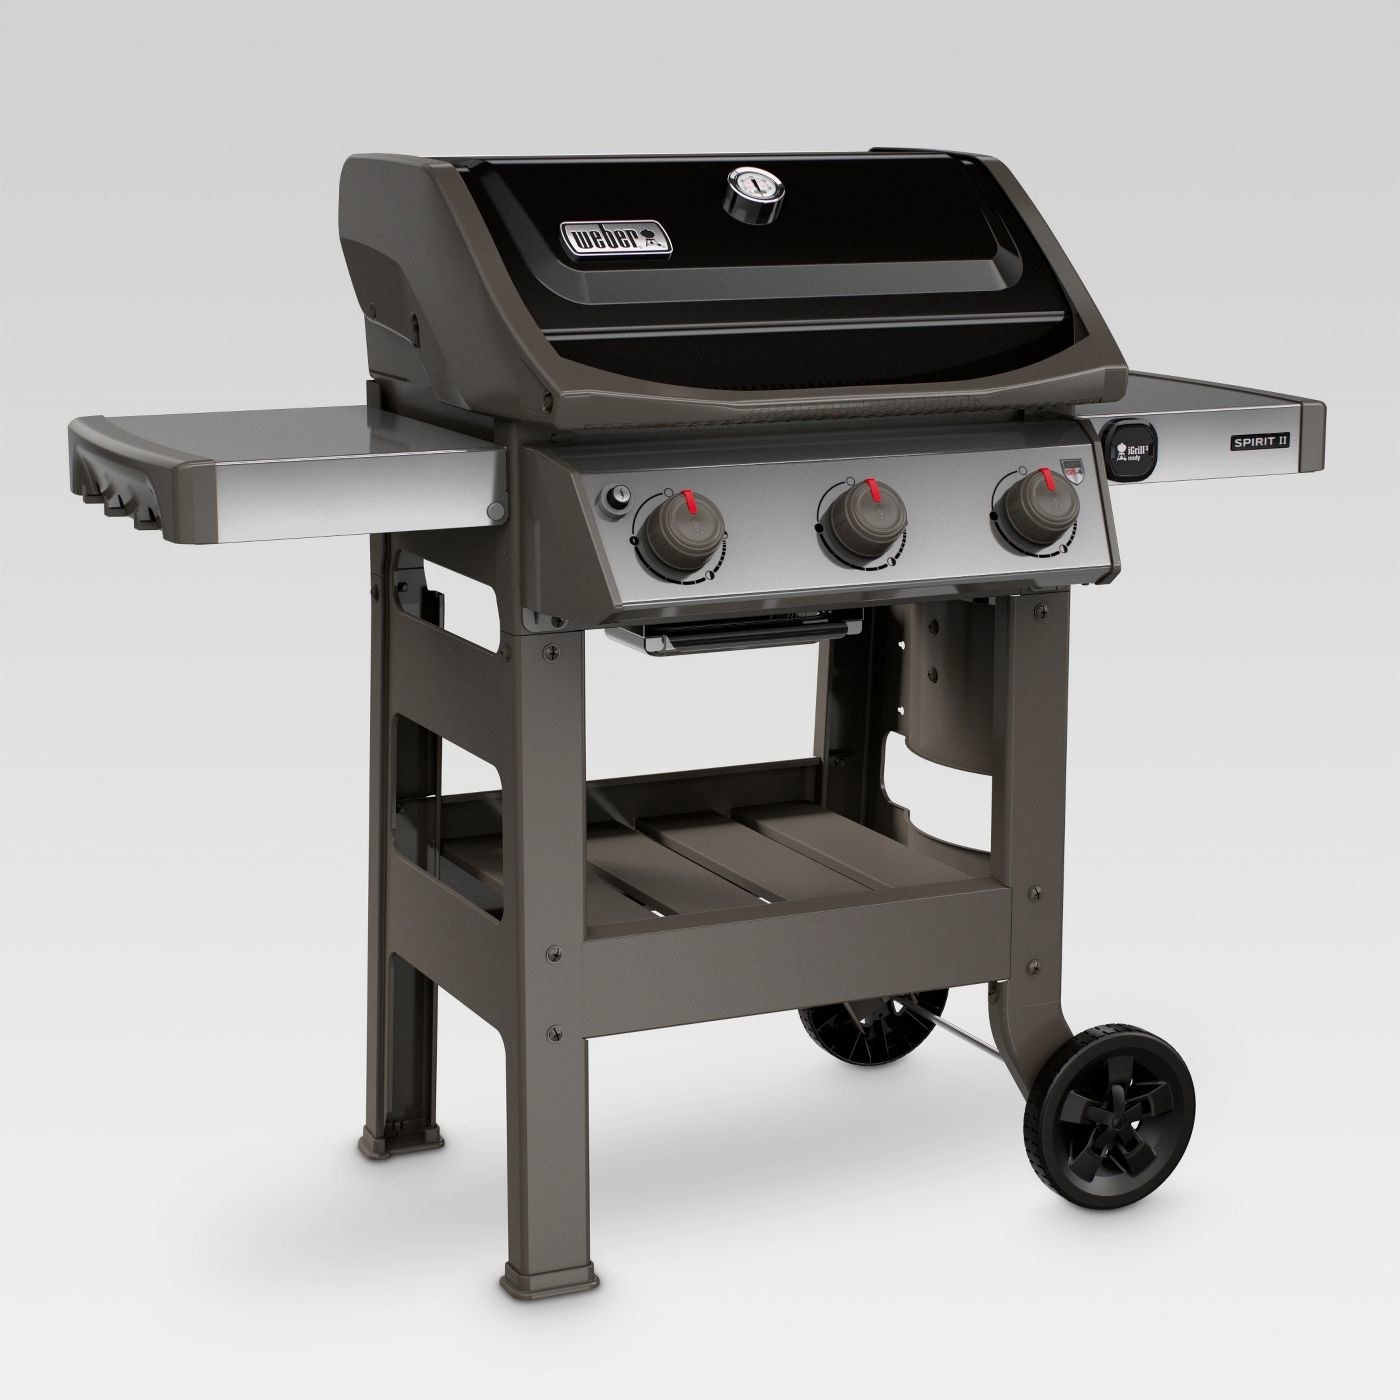 The three-burner LP gas grill with side tables